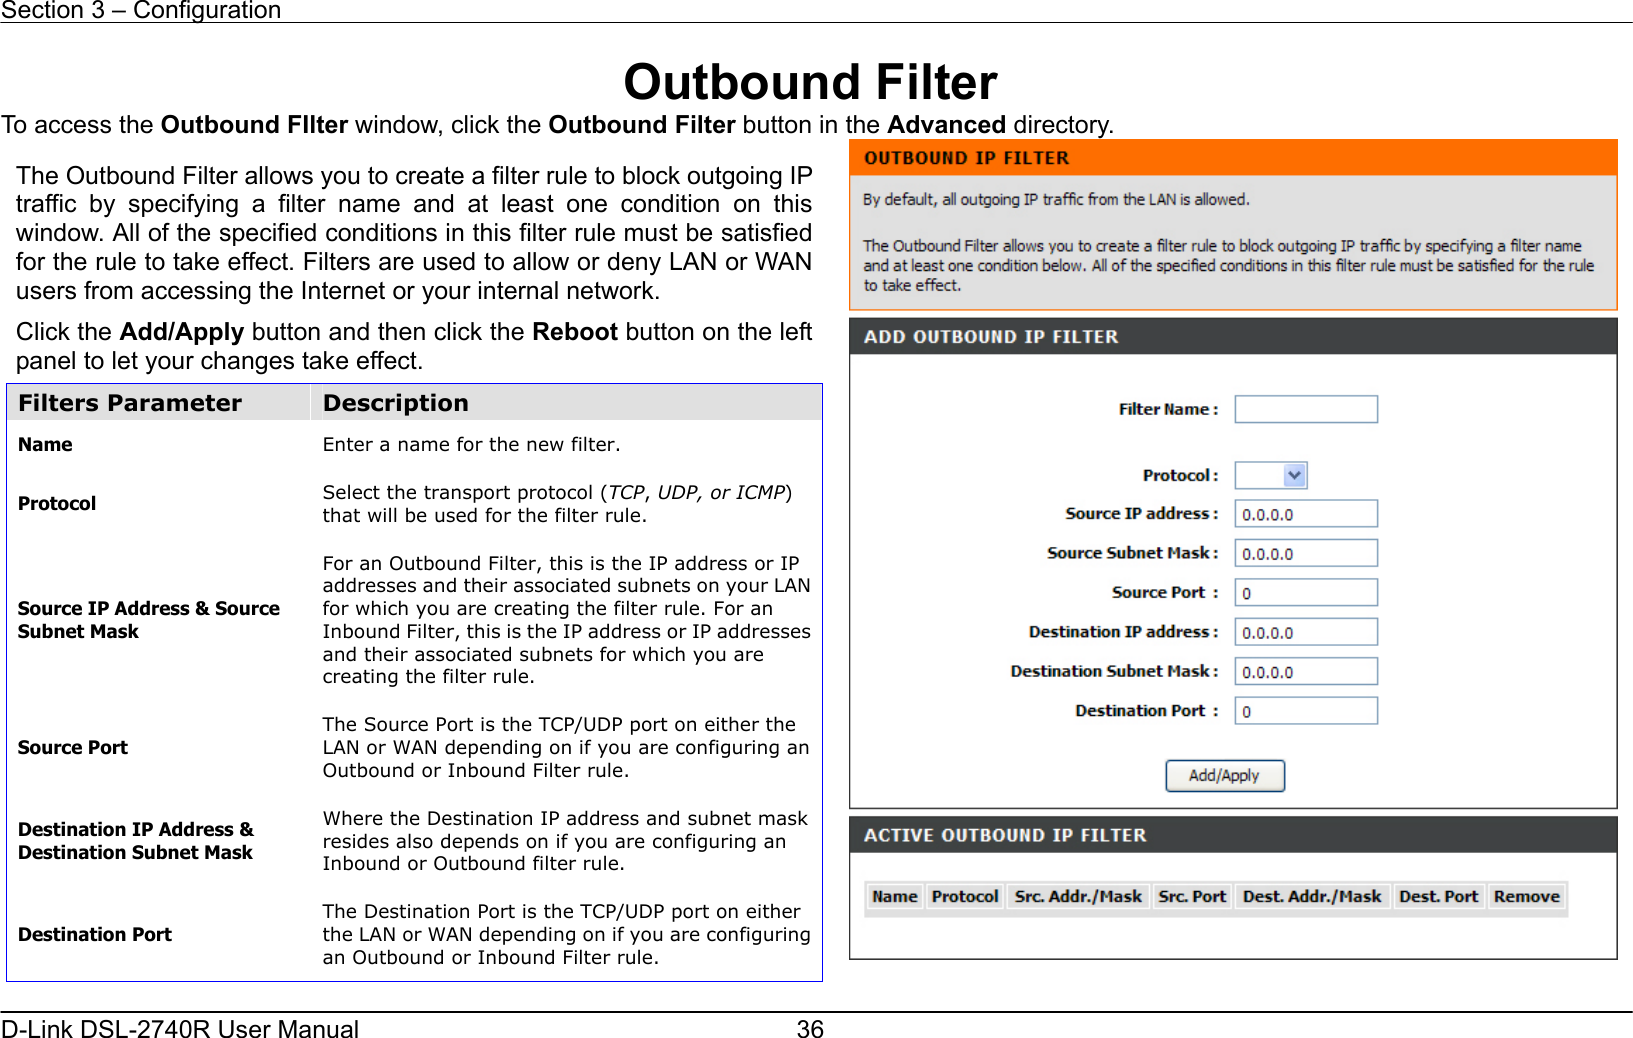 Section 3 – Configuration   D-Link DSL-2740R User Manual  36Outbound Filter To access the Outbound FIlter window, click the Outbound Filter button in the Advanced directory.   The Outbound Filter allows you to create a filter rule to block outgoing IP traffic by specifying a filter name and at least one condition on this window. All of the specified conditions in this filter rule must be satisfied for the rule to take effect. Filters are used to allow or deny LAN or WAN users from accessing the Internet or your internal network. Click the Add/Apply button and then click the Reboot button on the left panel to let your changes take effect. Filters Parameter  Description Name  Enter a name for the new filter. Protocol  Select the transport protocol (TCP, UDP, or ICMP) that will be used for the filter rule.   Source IP Address &amp; Source Subnet Mask For an Outbound Filter, this is the IP address or IP addresses and their associated subnets on your LAN for which you are creating the filter rule. For an Inbound Filter, this is the IP address or IP addresses and their associated subnets for which you are creating the filter rule.   Source Port The Source Port is the TCP/UDP port on either the LAN or WAN depending on if you are configuring an Outbound or Inbound Filter rule. Destination IP Address &amp; Destination Subnet Mask Where the Destination IP address and subnet mask resides also depends on if you are configuring an Inbound or Outbound filter rule.   Destination Port The Destination Port is the TCP/UDP port on either the LAN or WAN depending on if you are configuring an Outbound or Inbound Filter rule.   